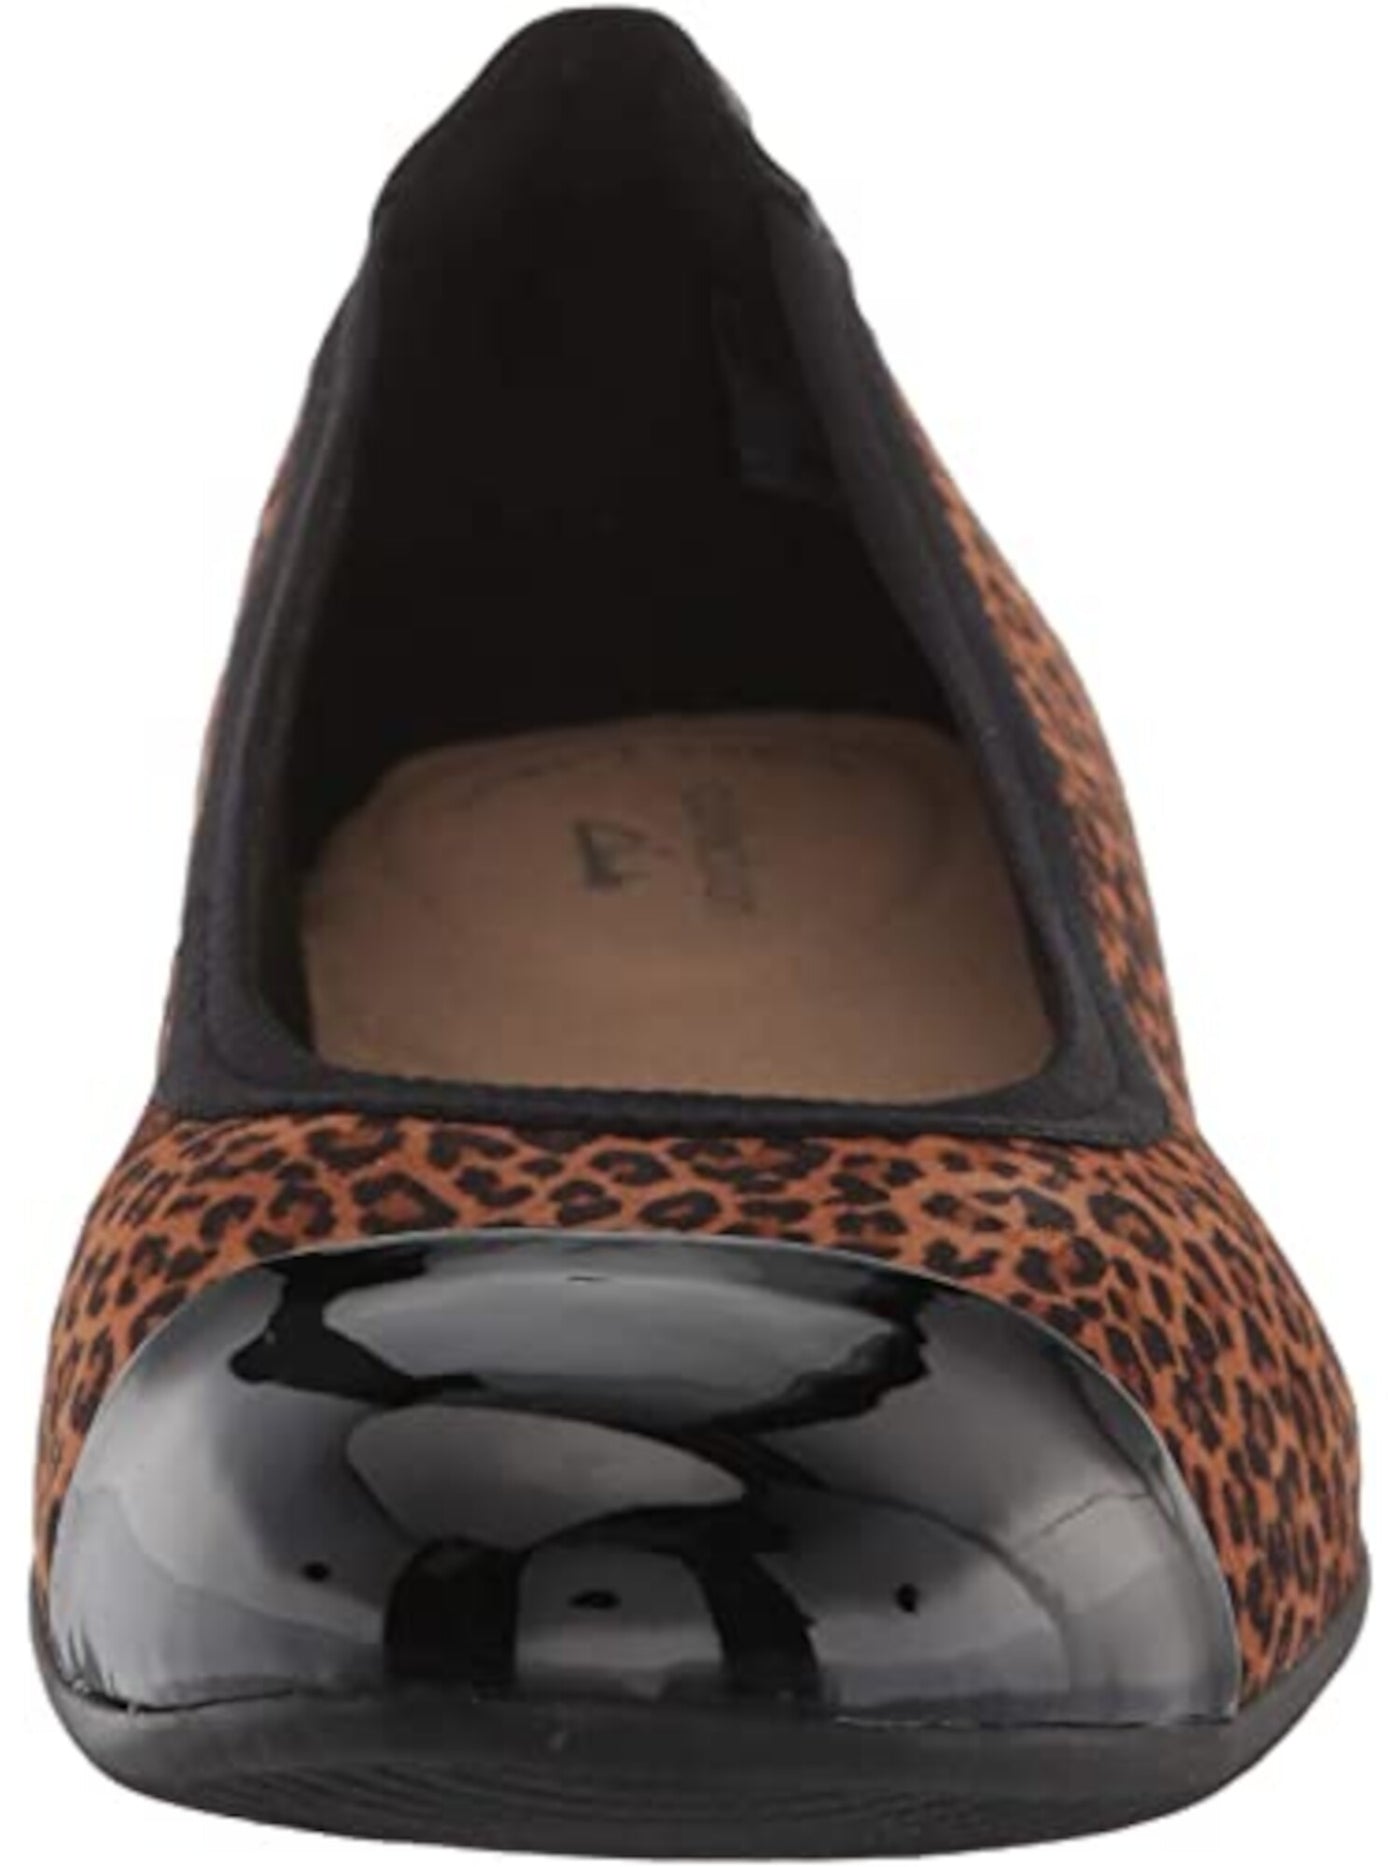 COLLECTION BY CLARKS Womens Orchid Brown Animal Print Cushioned Sara Cap Toe Slip On Leather Dress Flats Shoes 7 W